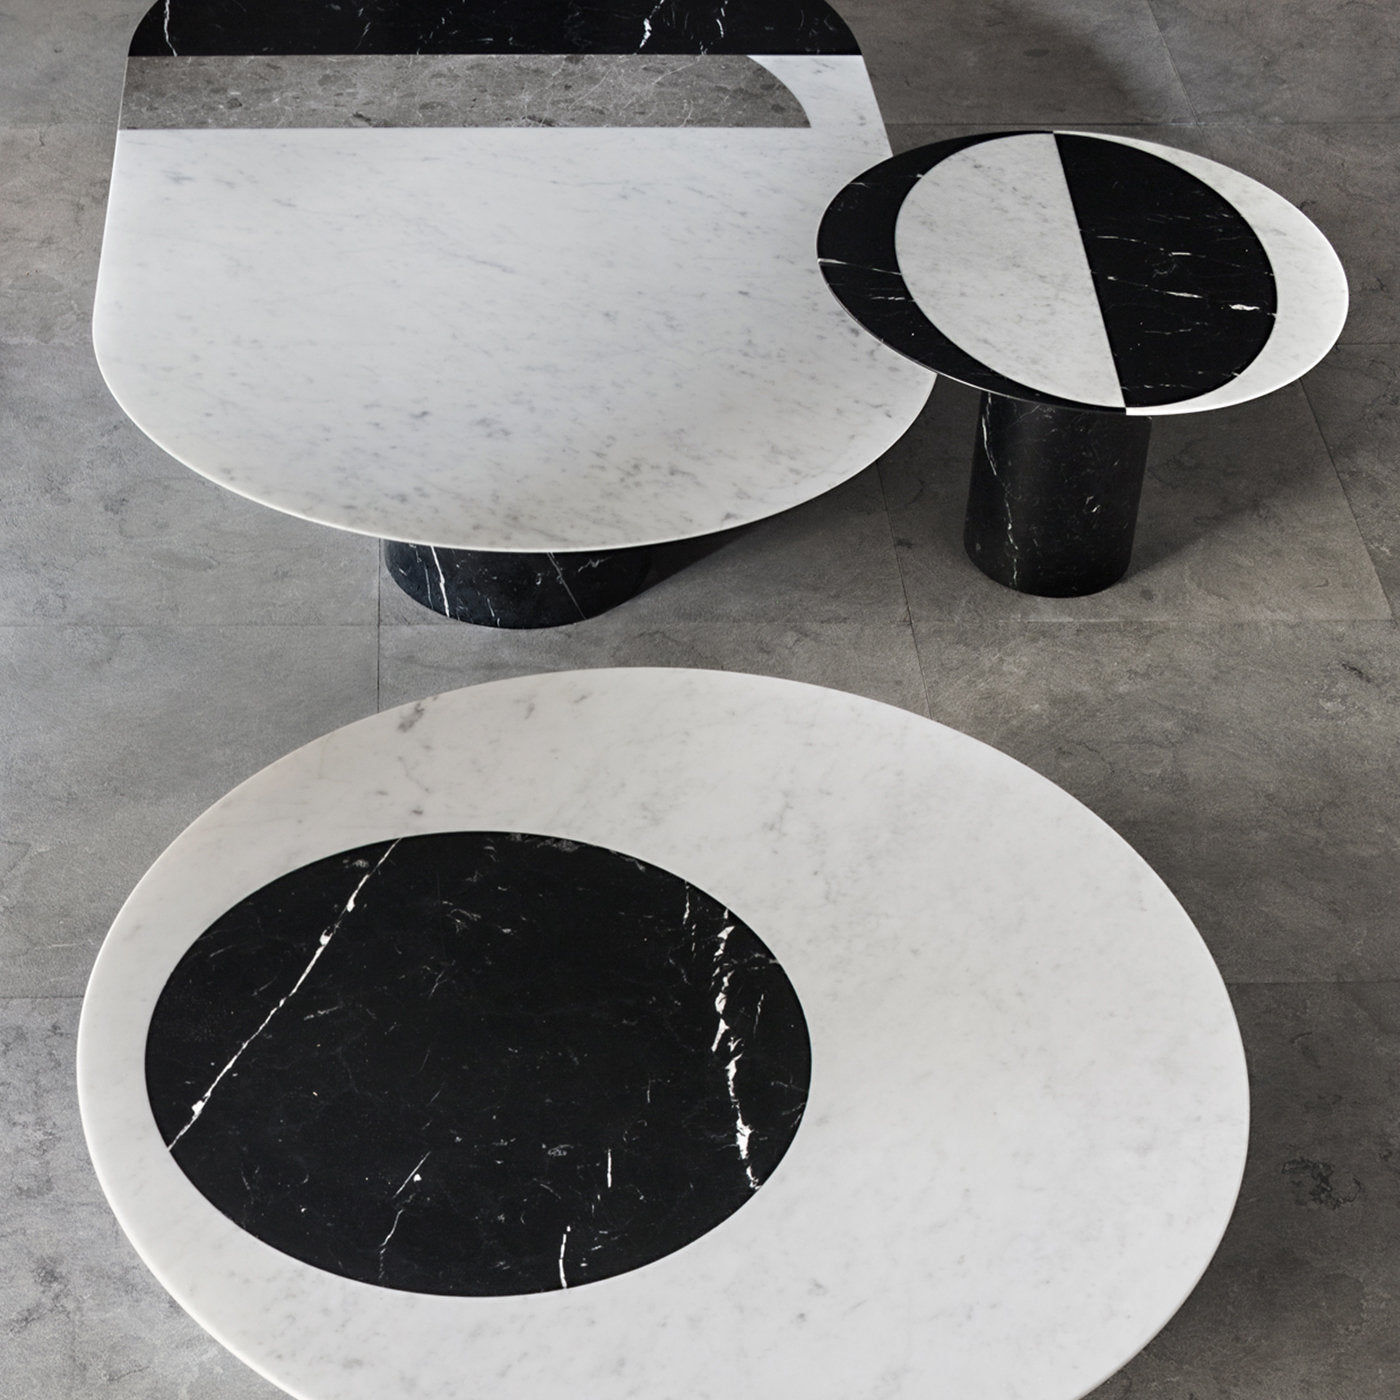 Proiezioni Round Black and White Marble Dining Table #1 by Elisa Ossino - Alternative view 4